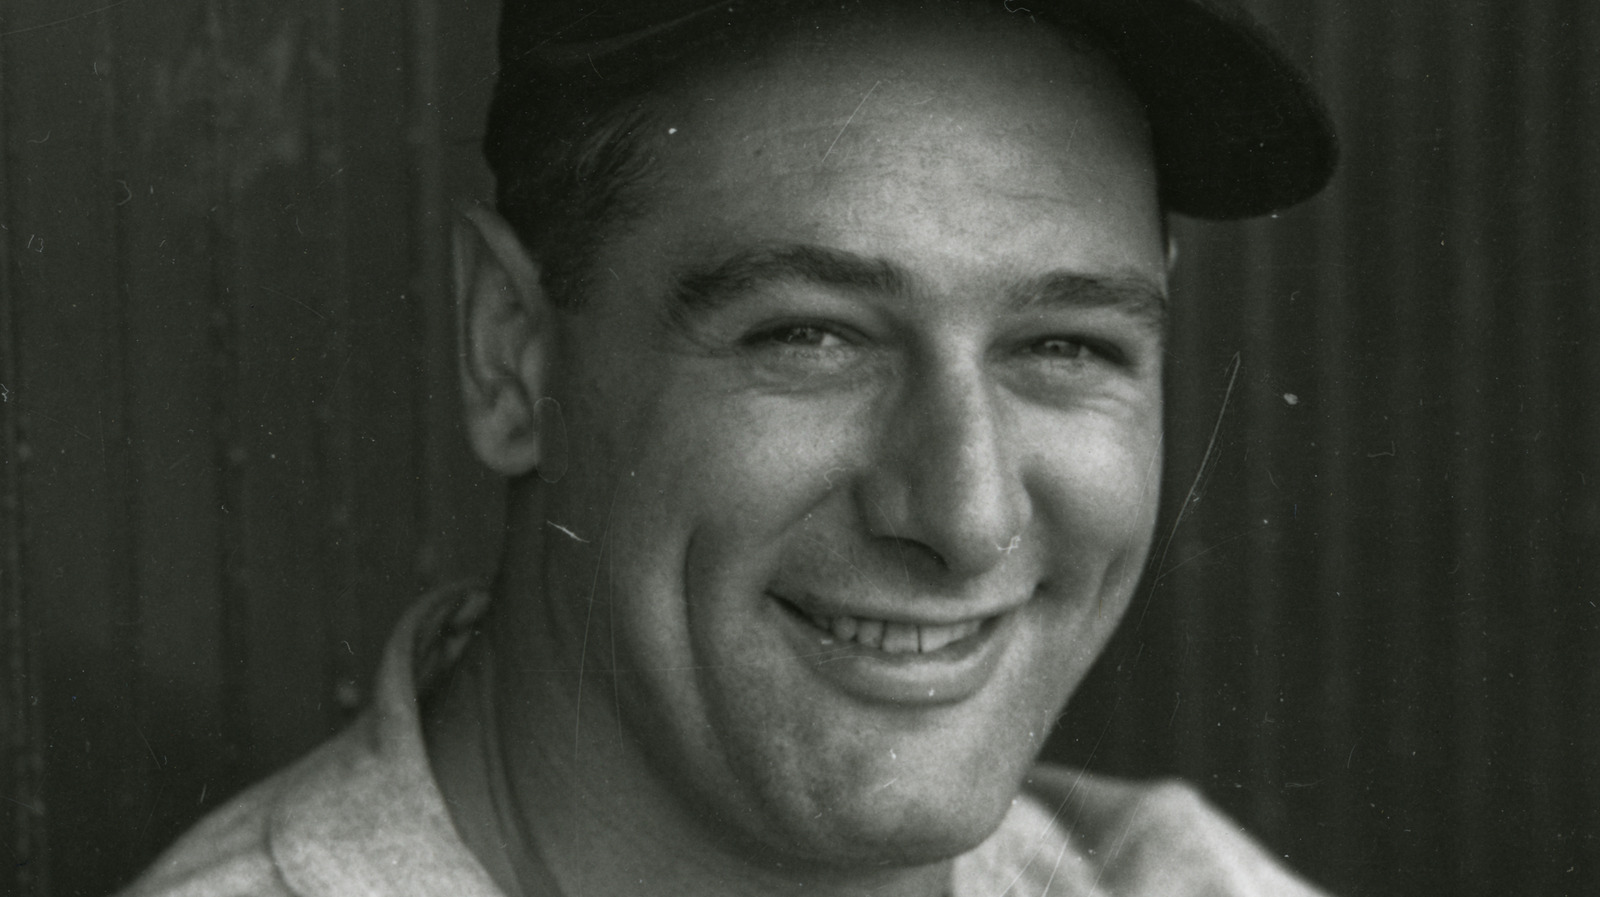 What Was Lou Gehrig's Life Like After Being Diagnosed With ALS